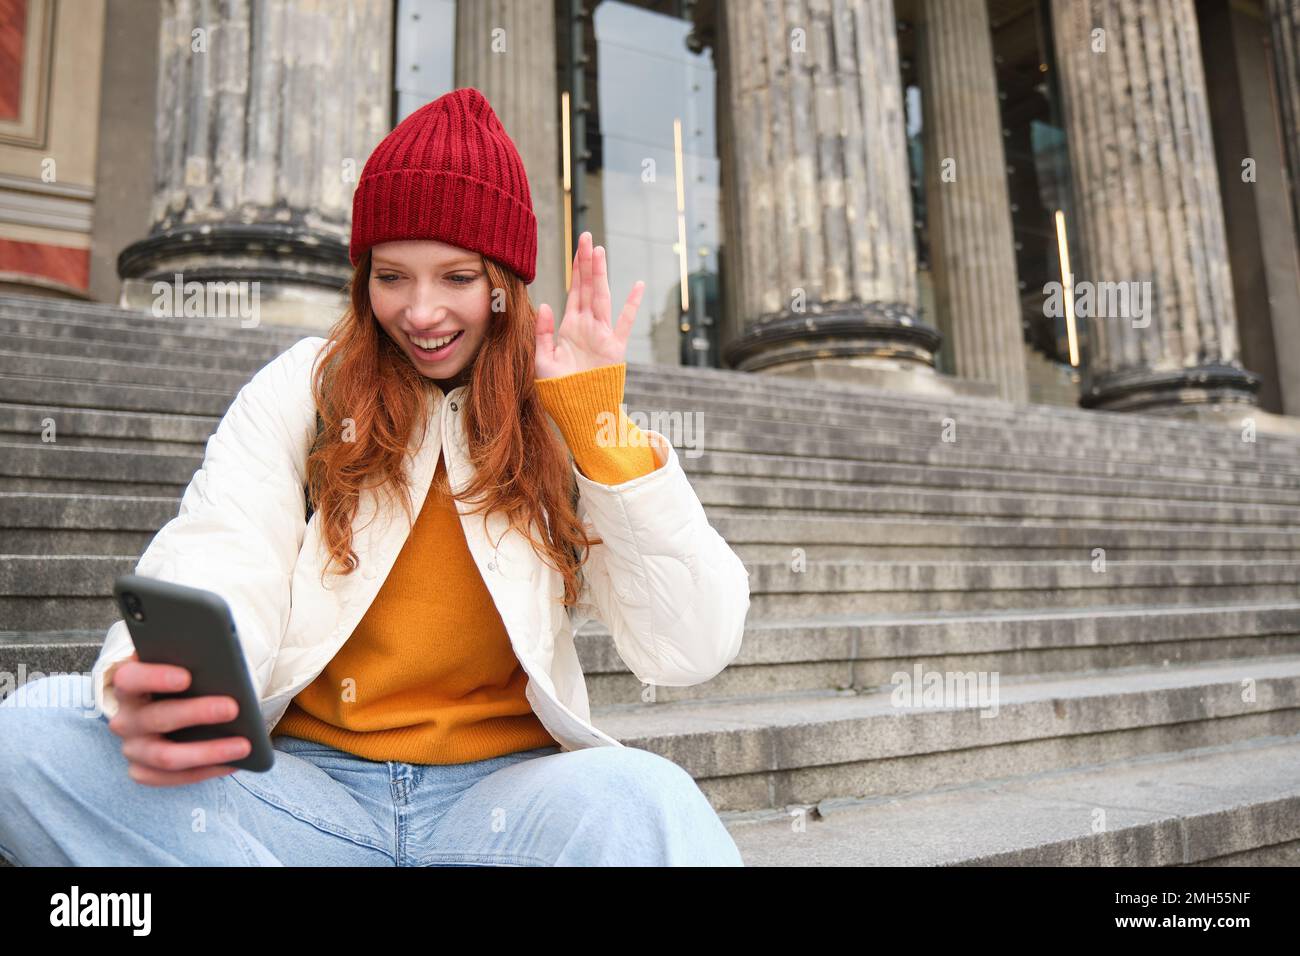 Young redhead woman sits on stairs outdoors and waves hand at smartphone camera, video chats with friends, connects to public wifi Stock Photo